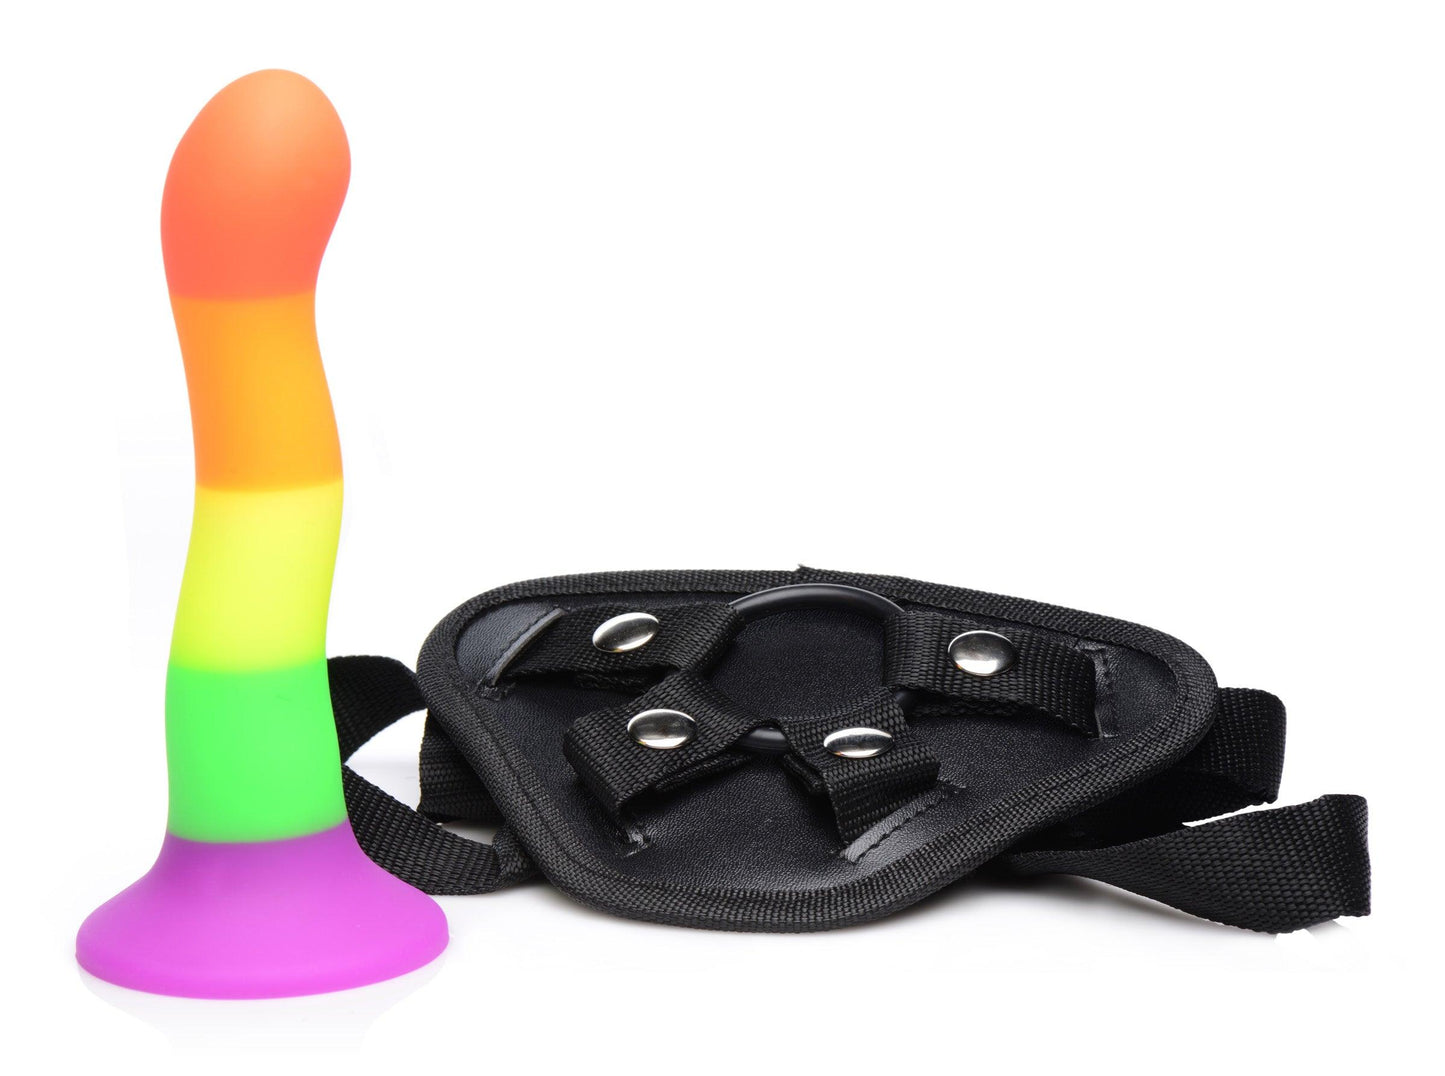 Proud Rainbow Silicone Dildo With Harness - My Sex Toy Hub